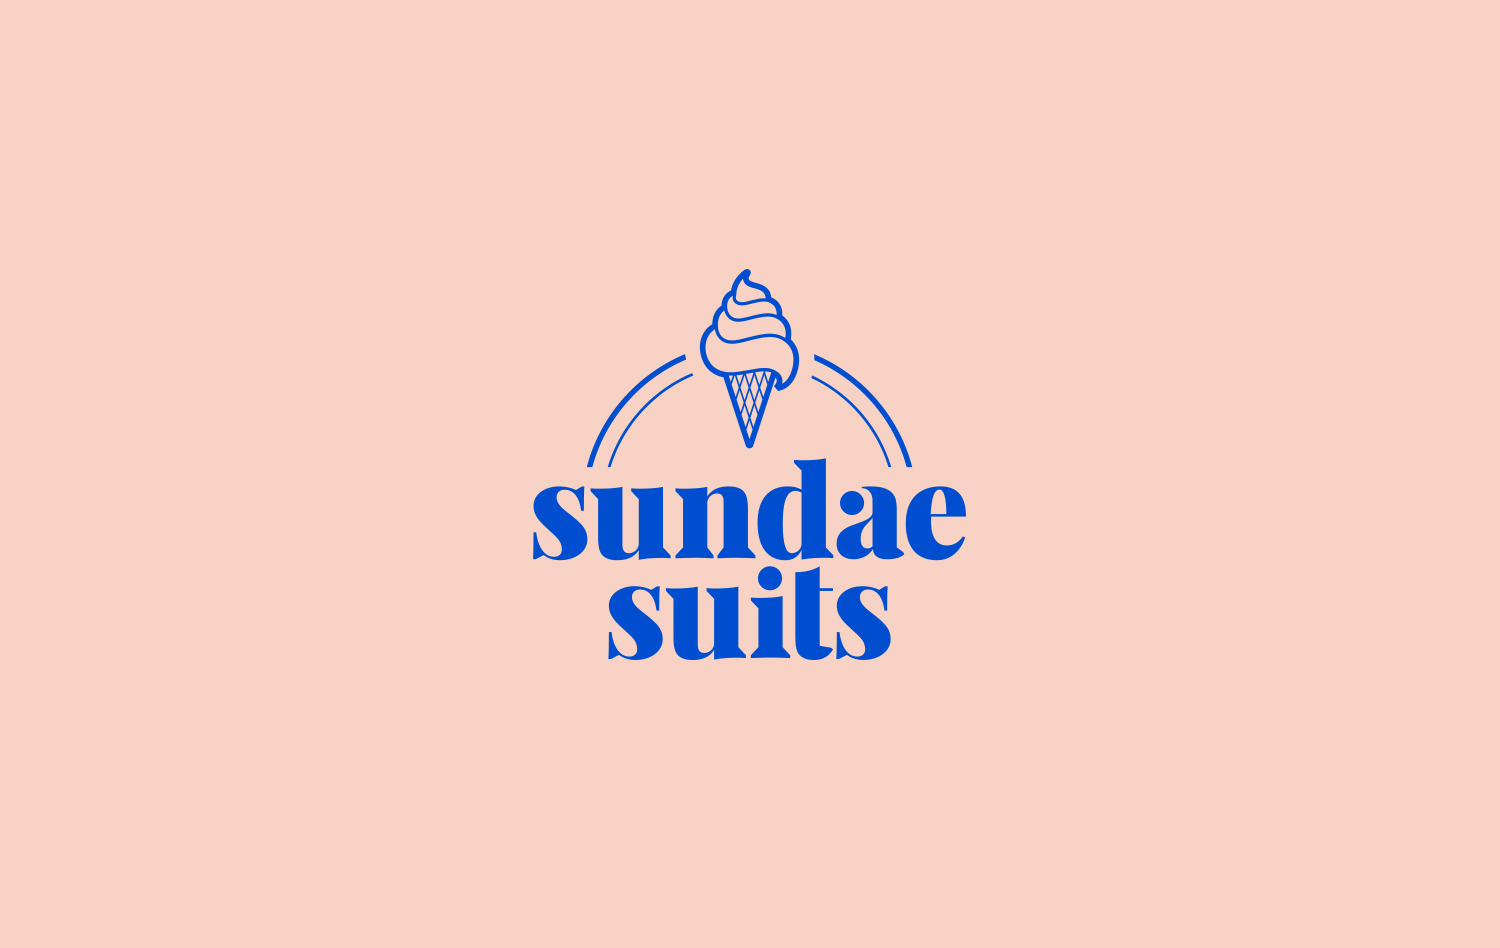  Sundae Suits (2017) Short sleeve and pant suits 